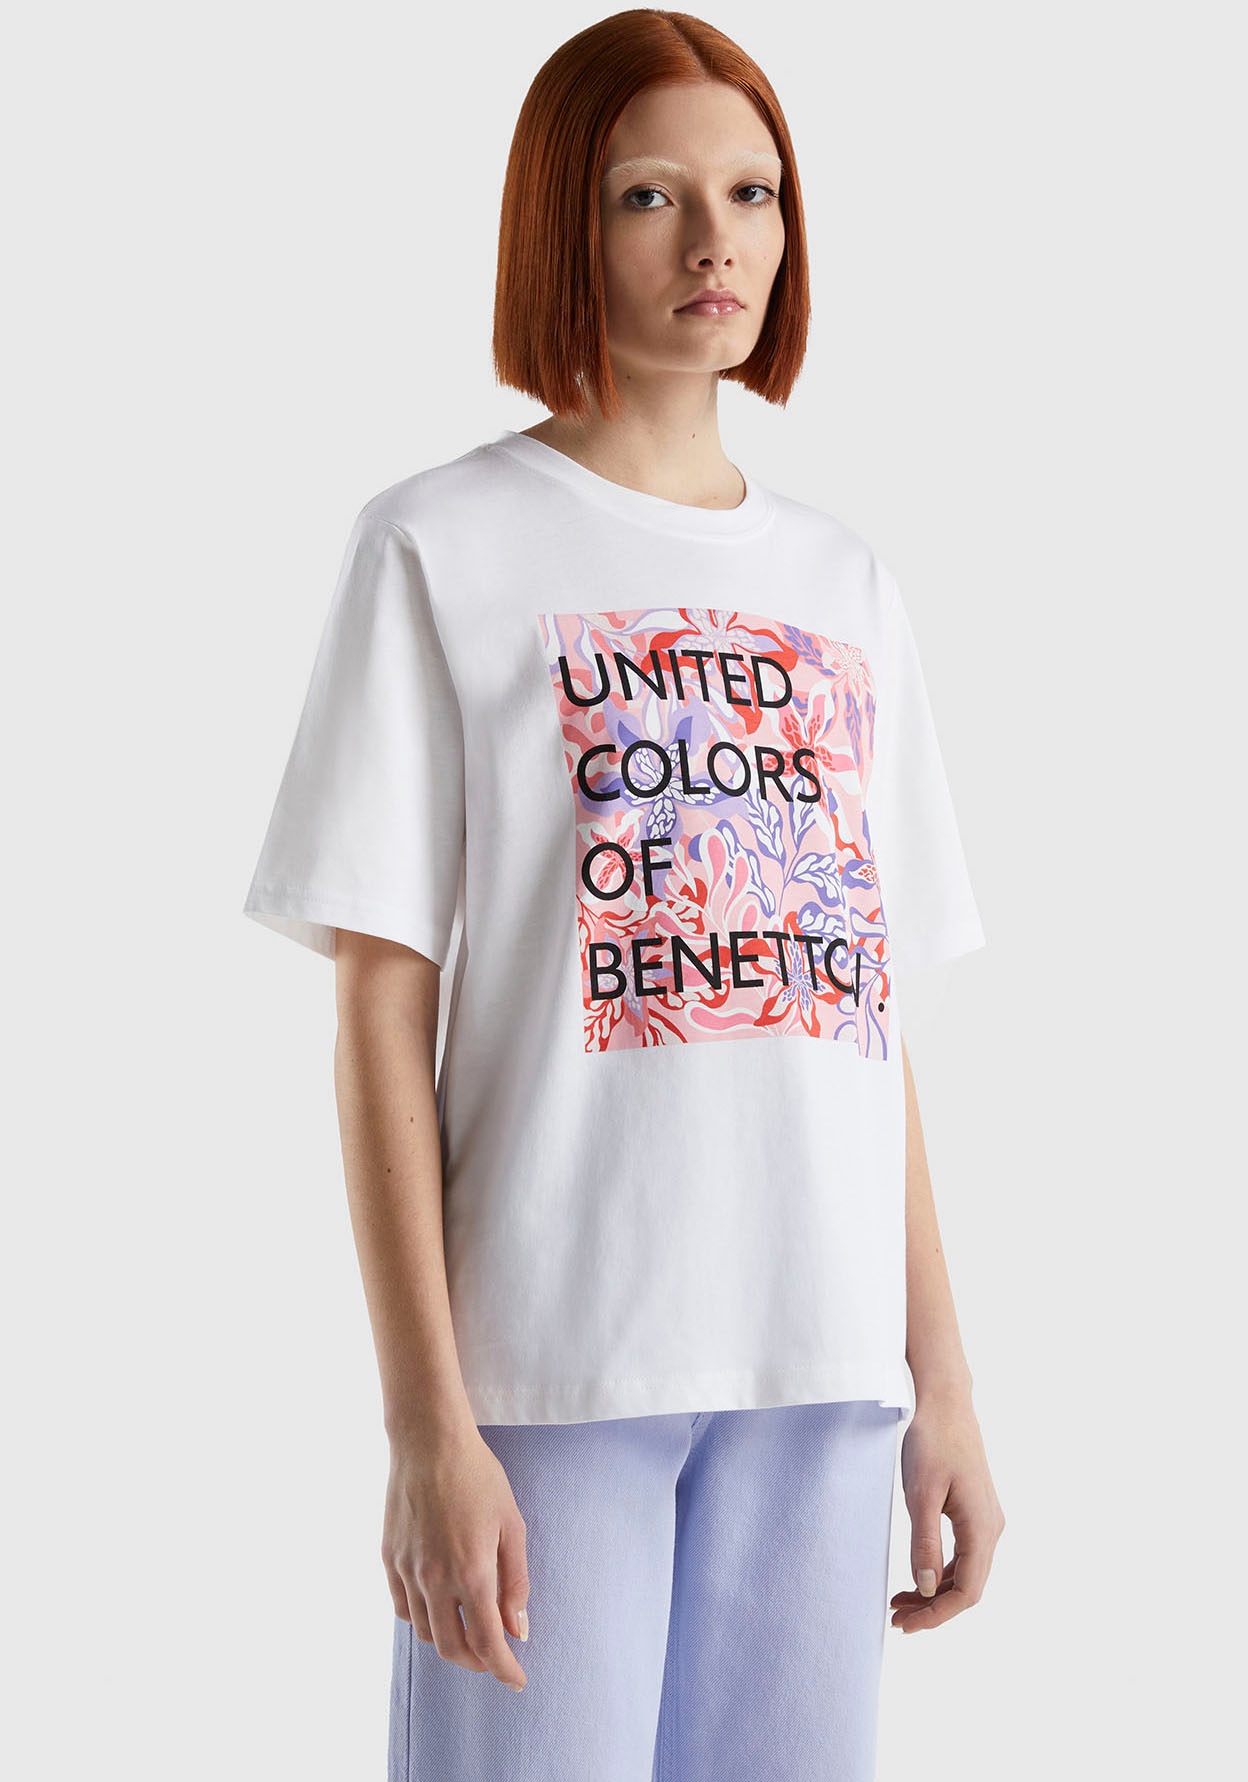 United Colors of ♕ Benetton T-Shirt bei